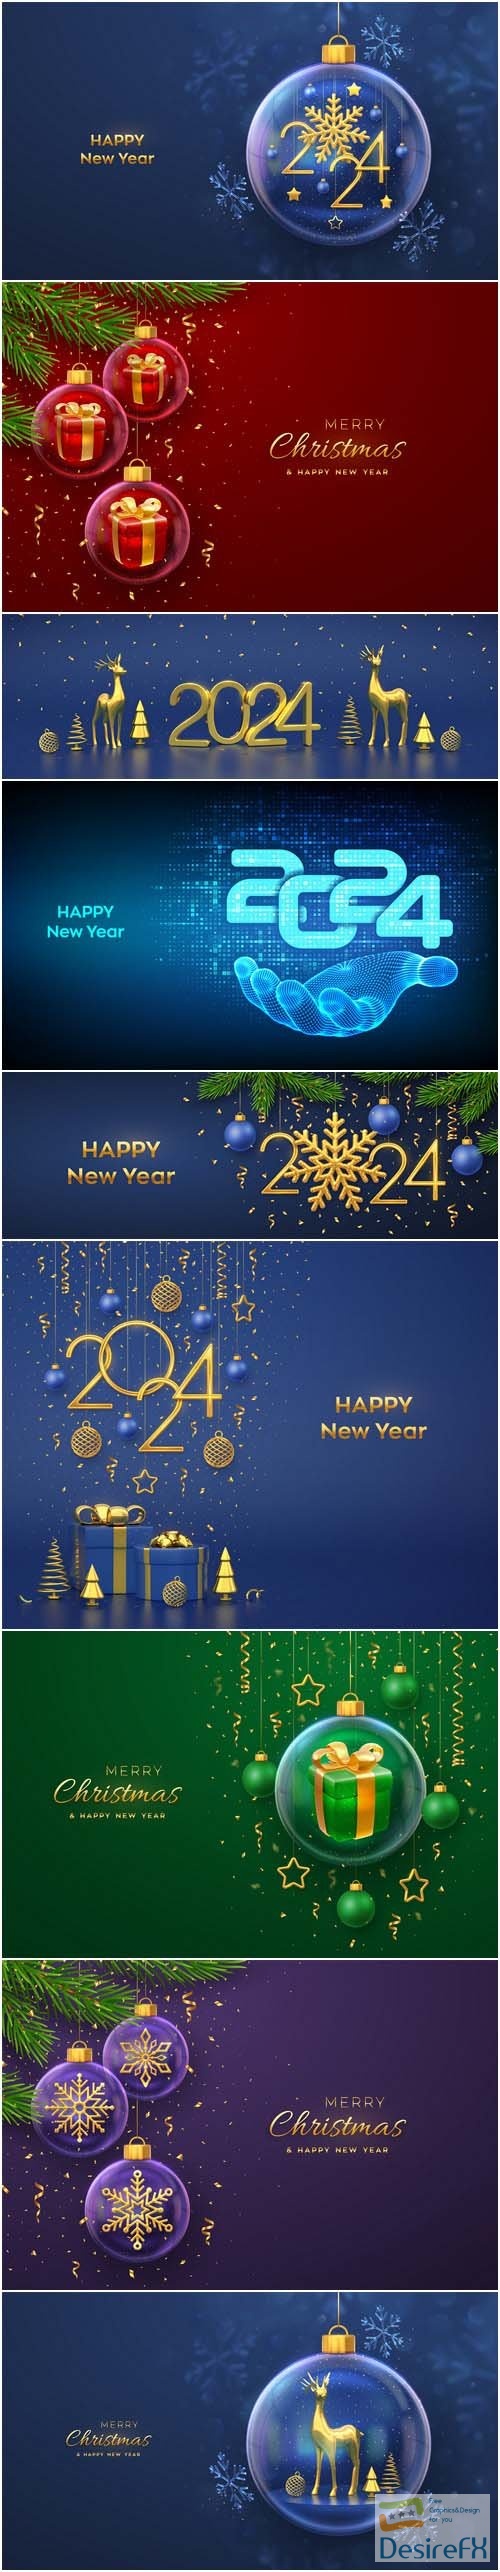 Happy new year 2024 hanging golden numbers, vector 3d stars balls confetti